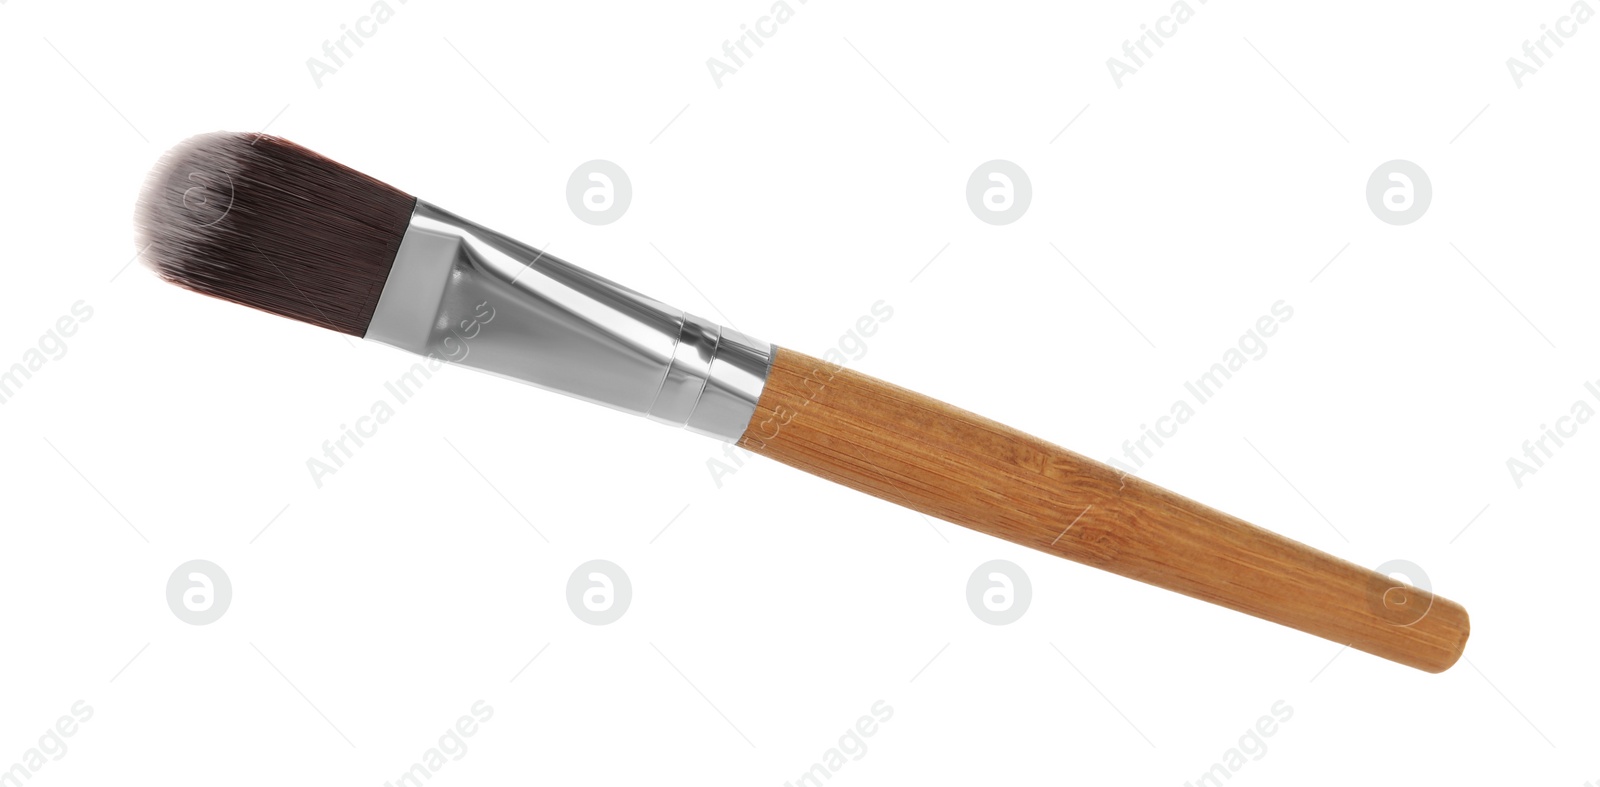 Photo of Makeup brush with wooden handle isolated on white